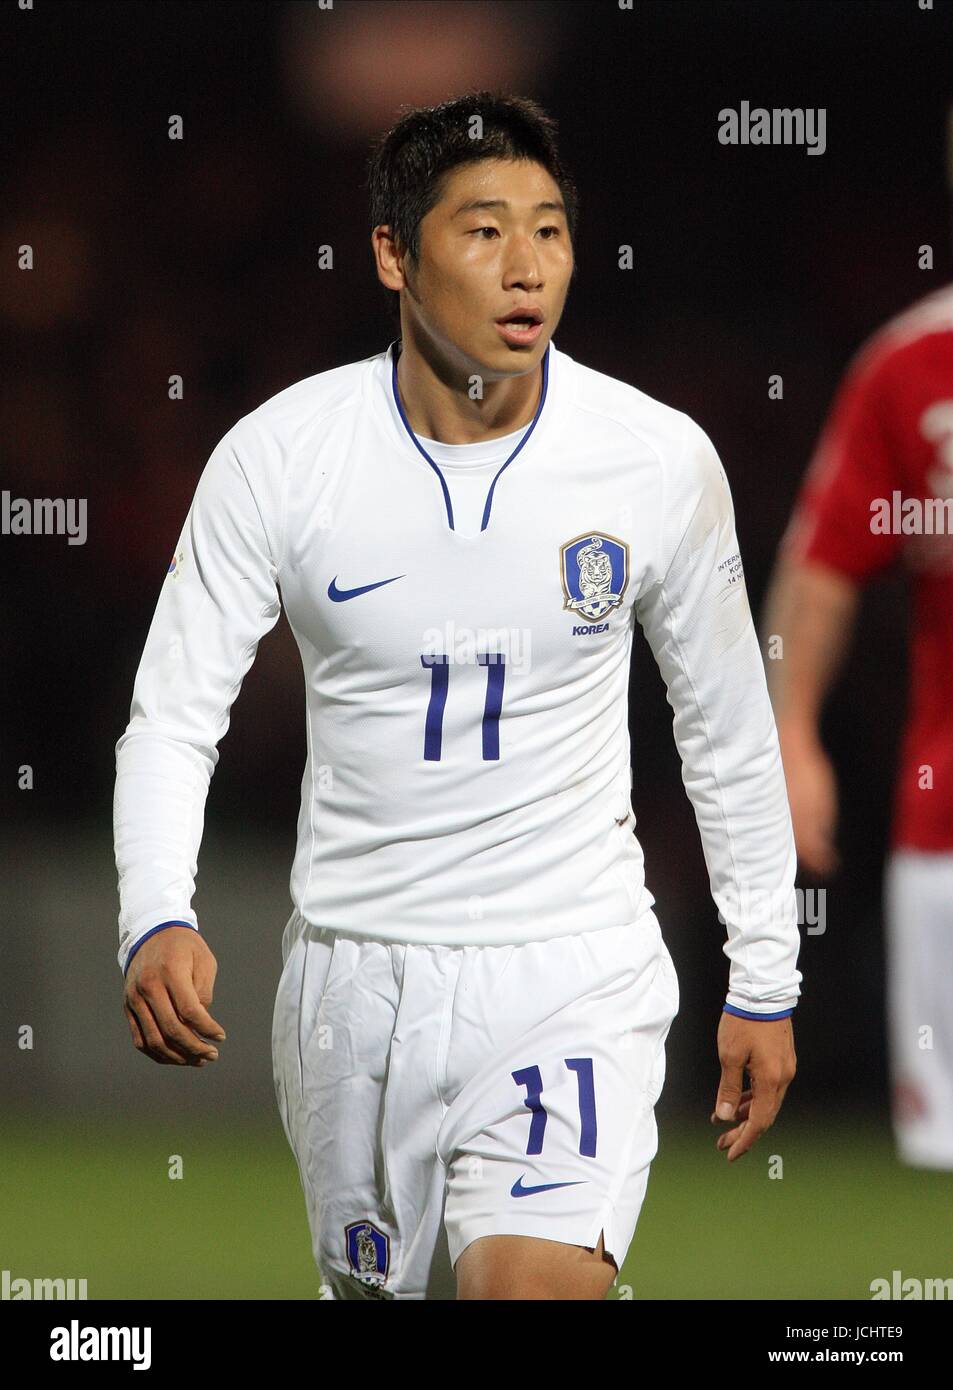 LEE KEUN-HO SOUTH KOREA DENMARK V SOUTH KOREA BLUE WATER STADIUM,ESJBERG,DENMARK 14 November 2009 GAA3466     WARNING! This Photograph May Only Be Used For Newspaper And/Or Magazine Editorial Purposes. May Not Be Used For, Internet/Online Usage Nor For Publications Involving 1 player, 1 Club Or 1 Competition, Without Written Authorisation From Football DataCo Ltd. For Any Queries, Please Contact Football DataCo Ltd on +44 (0) 207 864 9121 Stock Photo